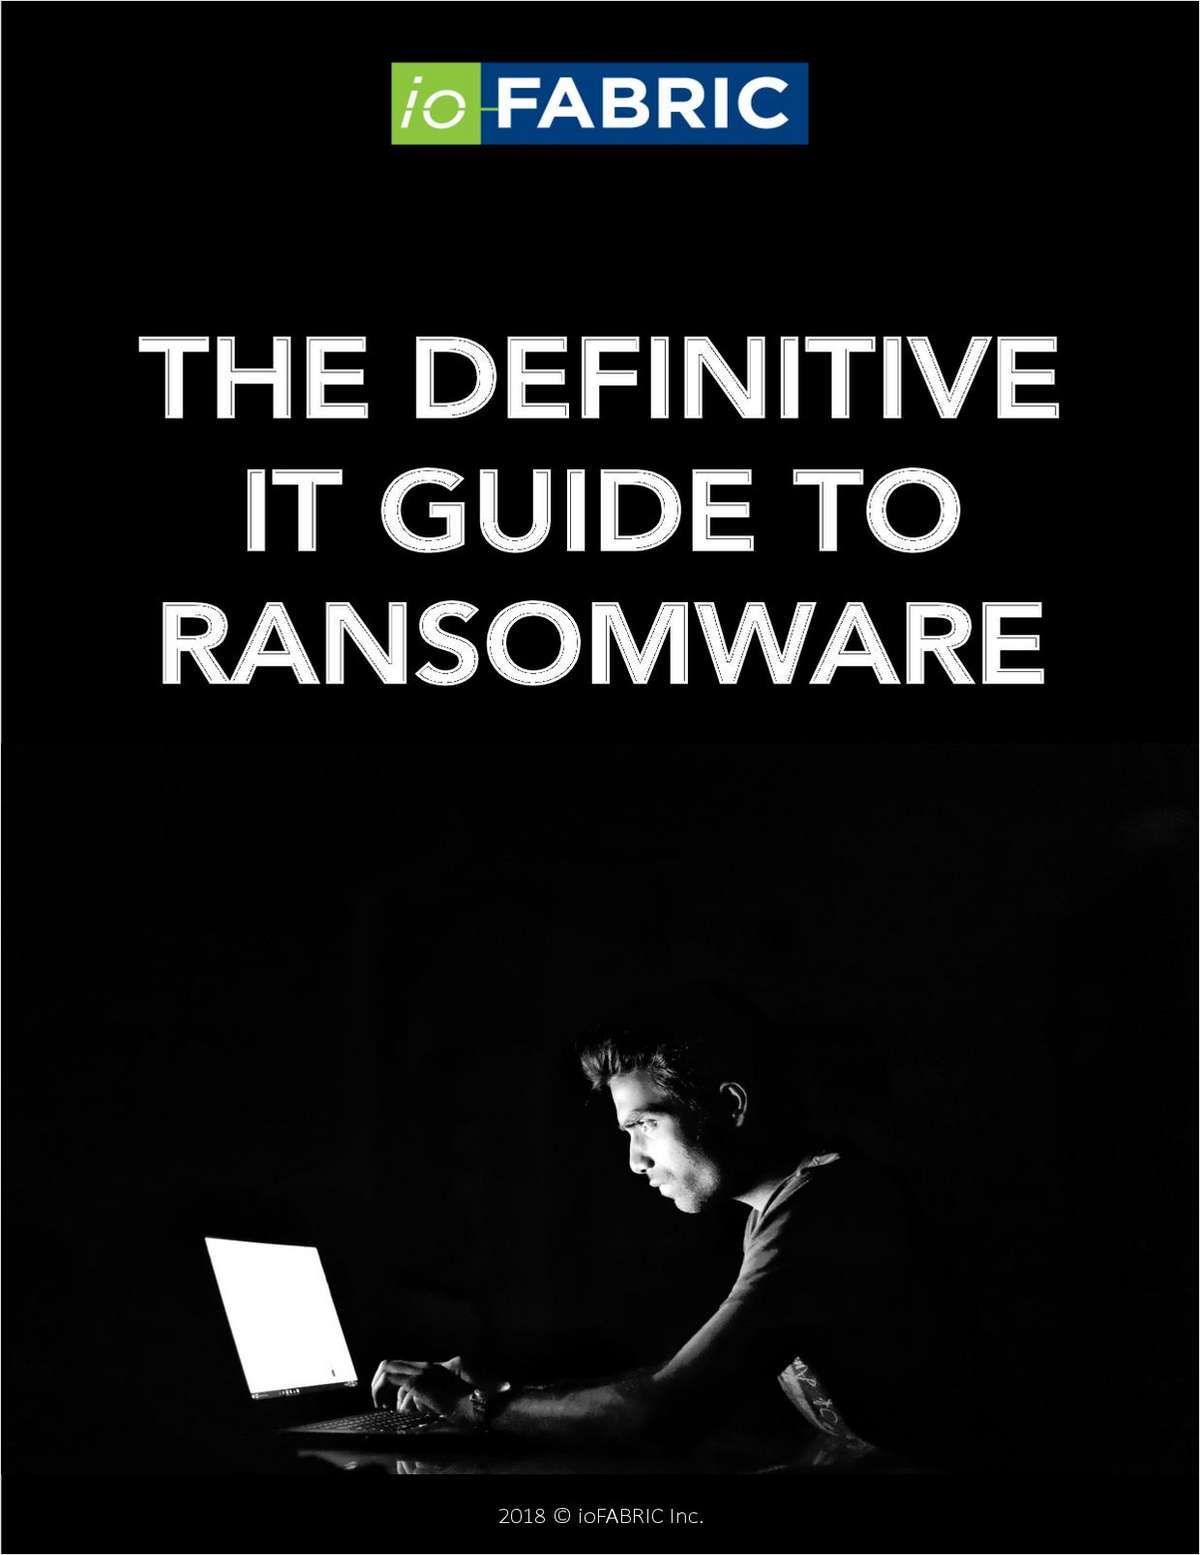 The Definitive IT Guide to Ransomware